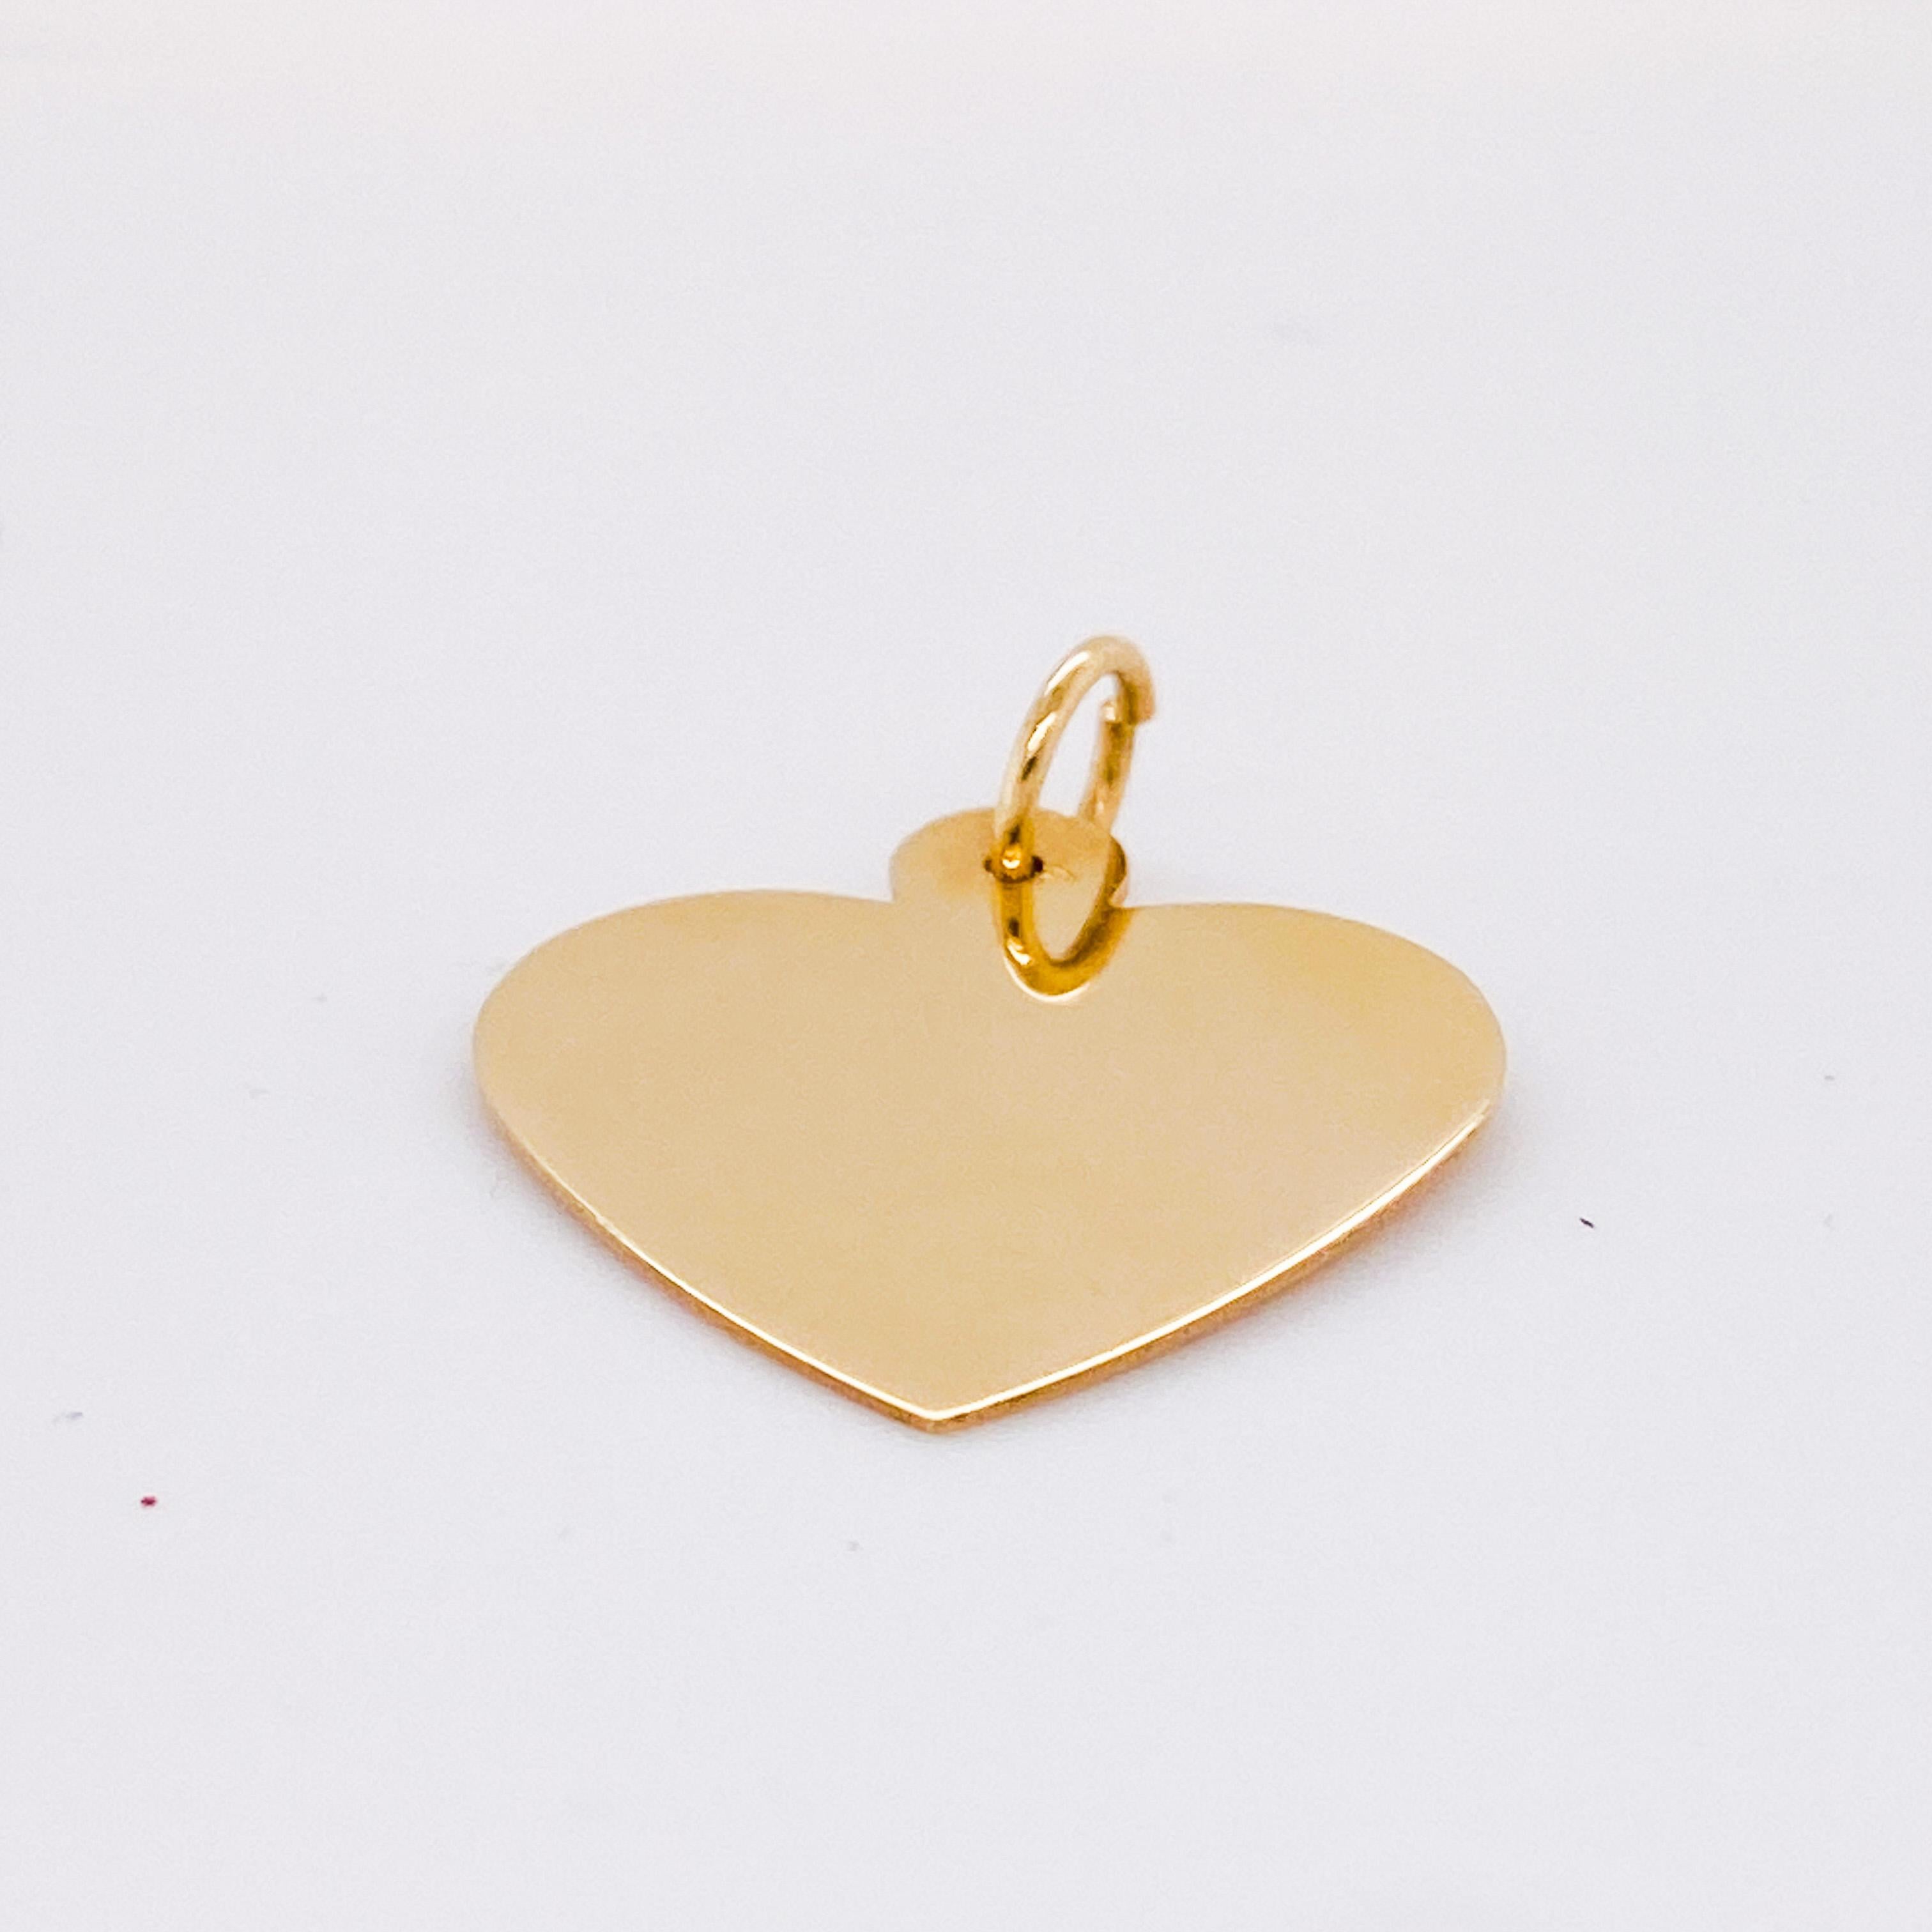 This beautifully preserved vintage heart disk is ready to grace your favorite chain or charm bracelet. The flat disk of the heart can create a perfect stack with other pendants or hearts! If you know an engraver, both sides can be engraved! The